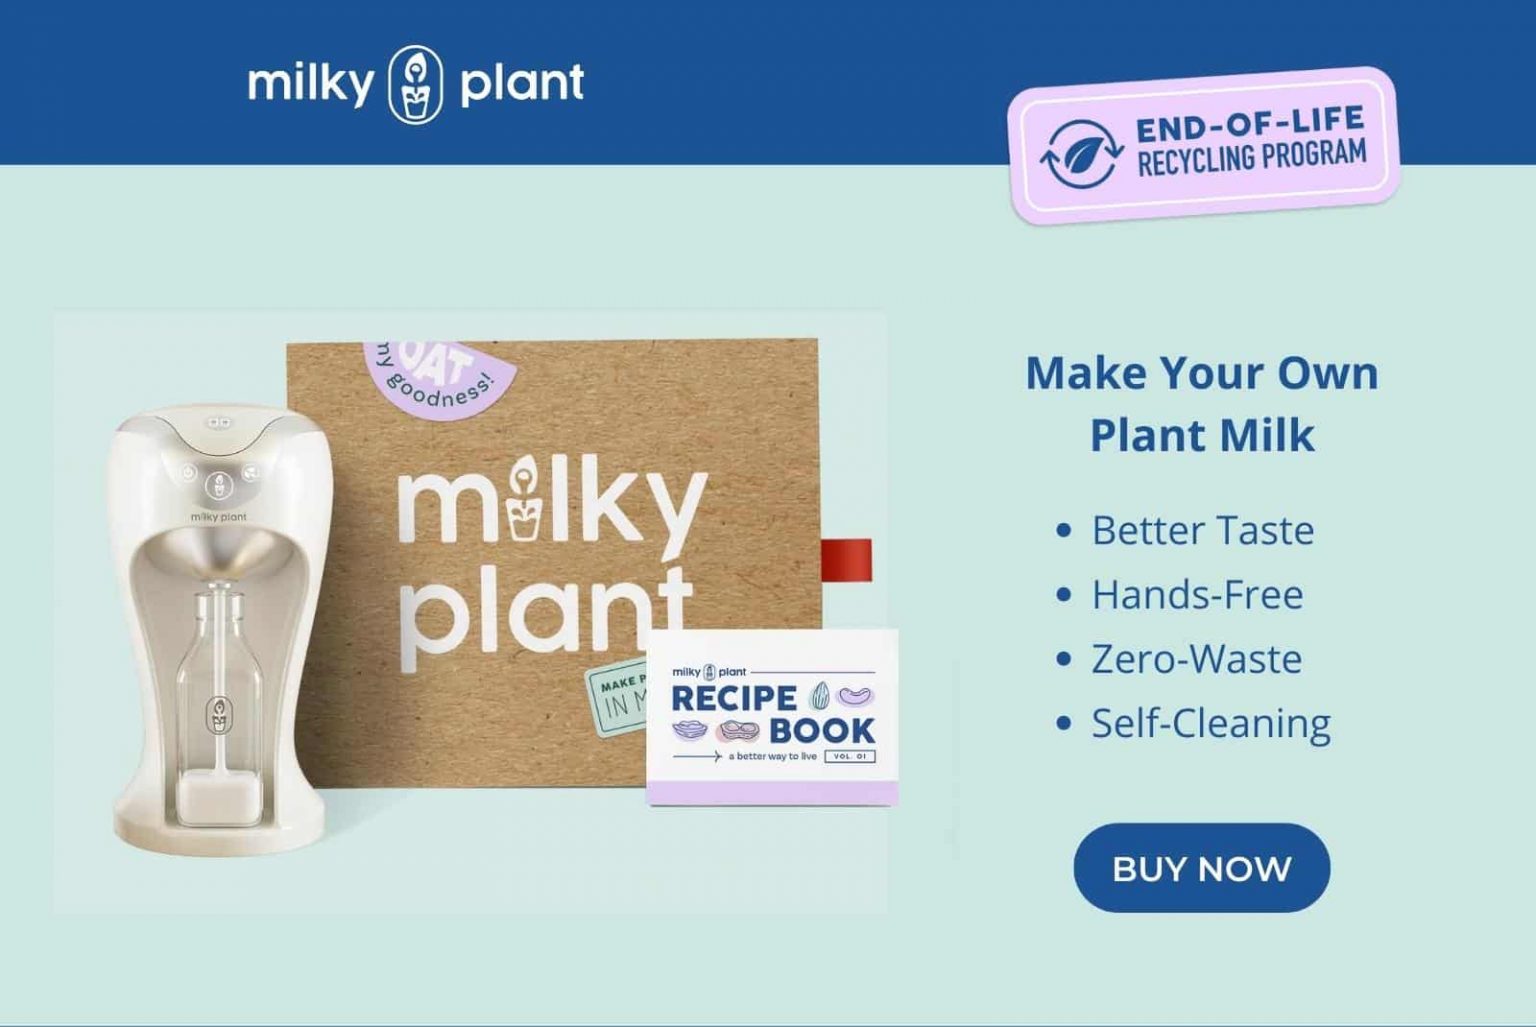 The Milky Plant makes fresh, nutritious plant milk in 3 minutes. No mess. No fuss.